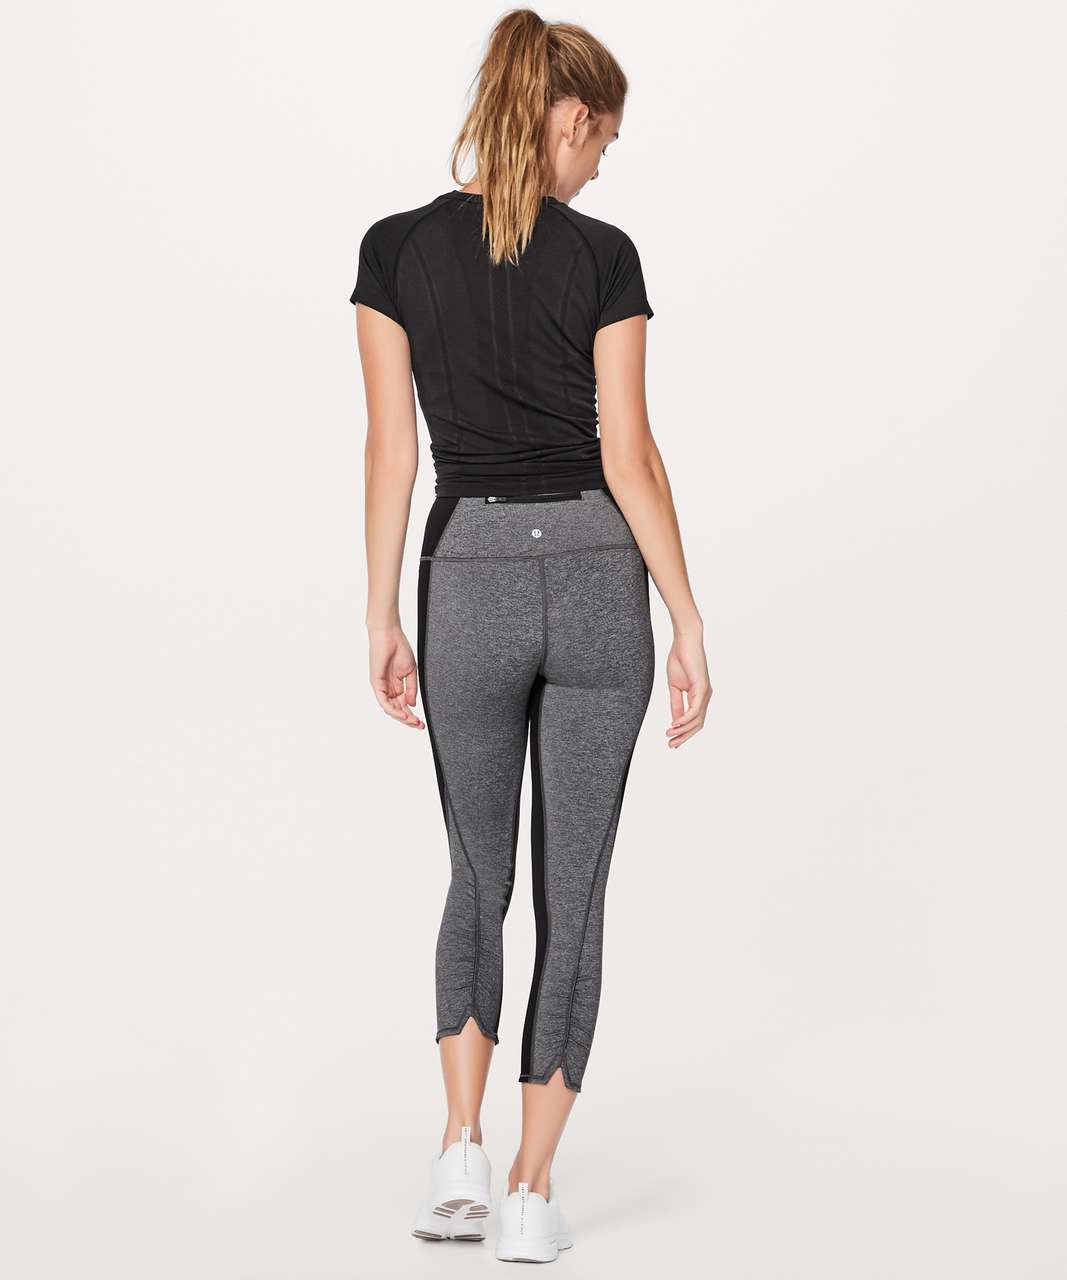 Lululemon Colour Me Quick Cropped Black Leggings Size 6 - $23 - From Bailey